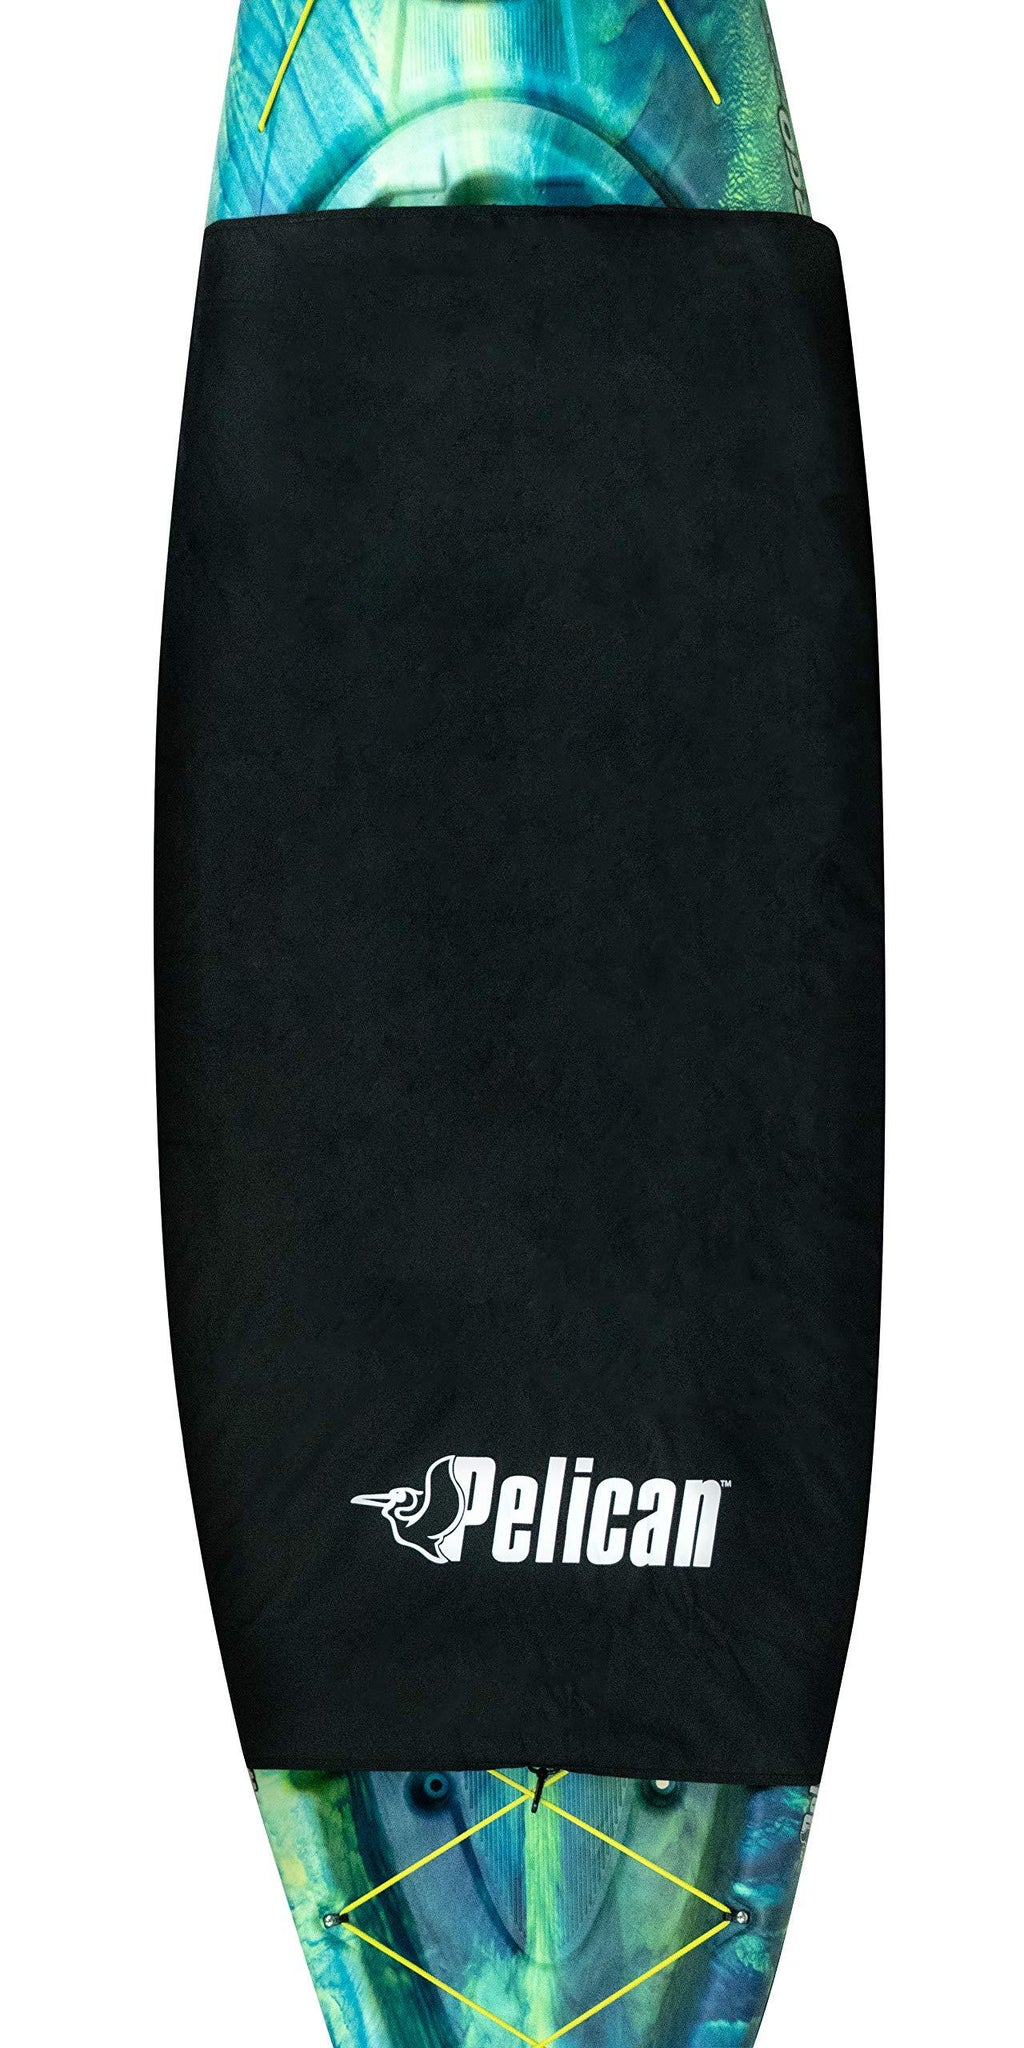 Pelican Sport - Cockpit Drape - for Kayak Up to 34 inches (86.36 cm) - Keep The Dust, Sand and Spider Webs Out of Your Sit-in Kayak - Easy to Use - PS1999-00 - BeesActive Australia